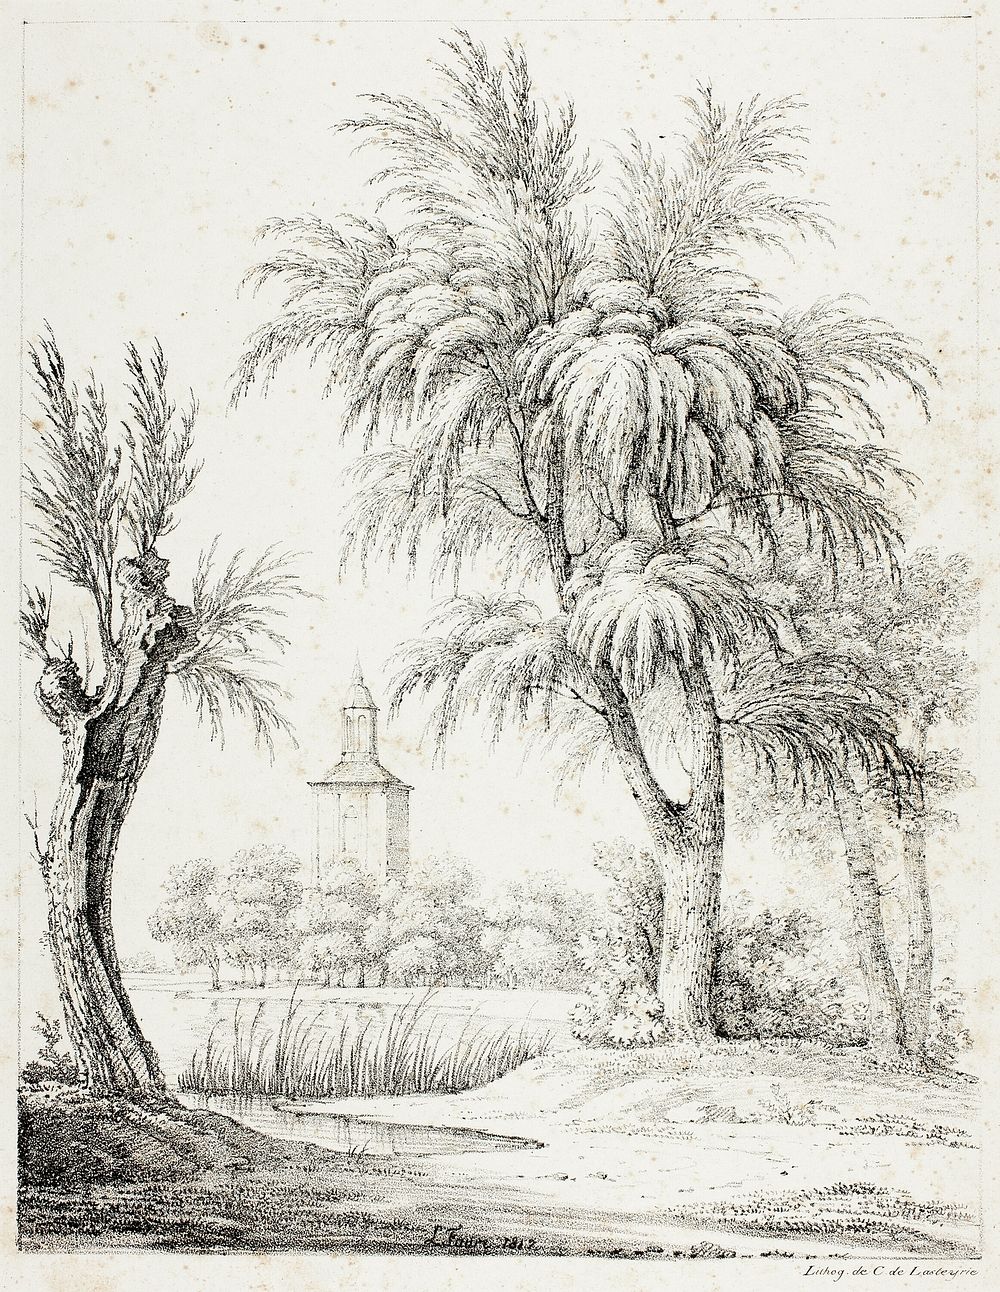 Landscape with Steeple by Louis Faure